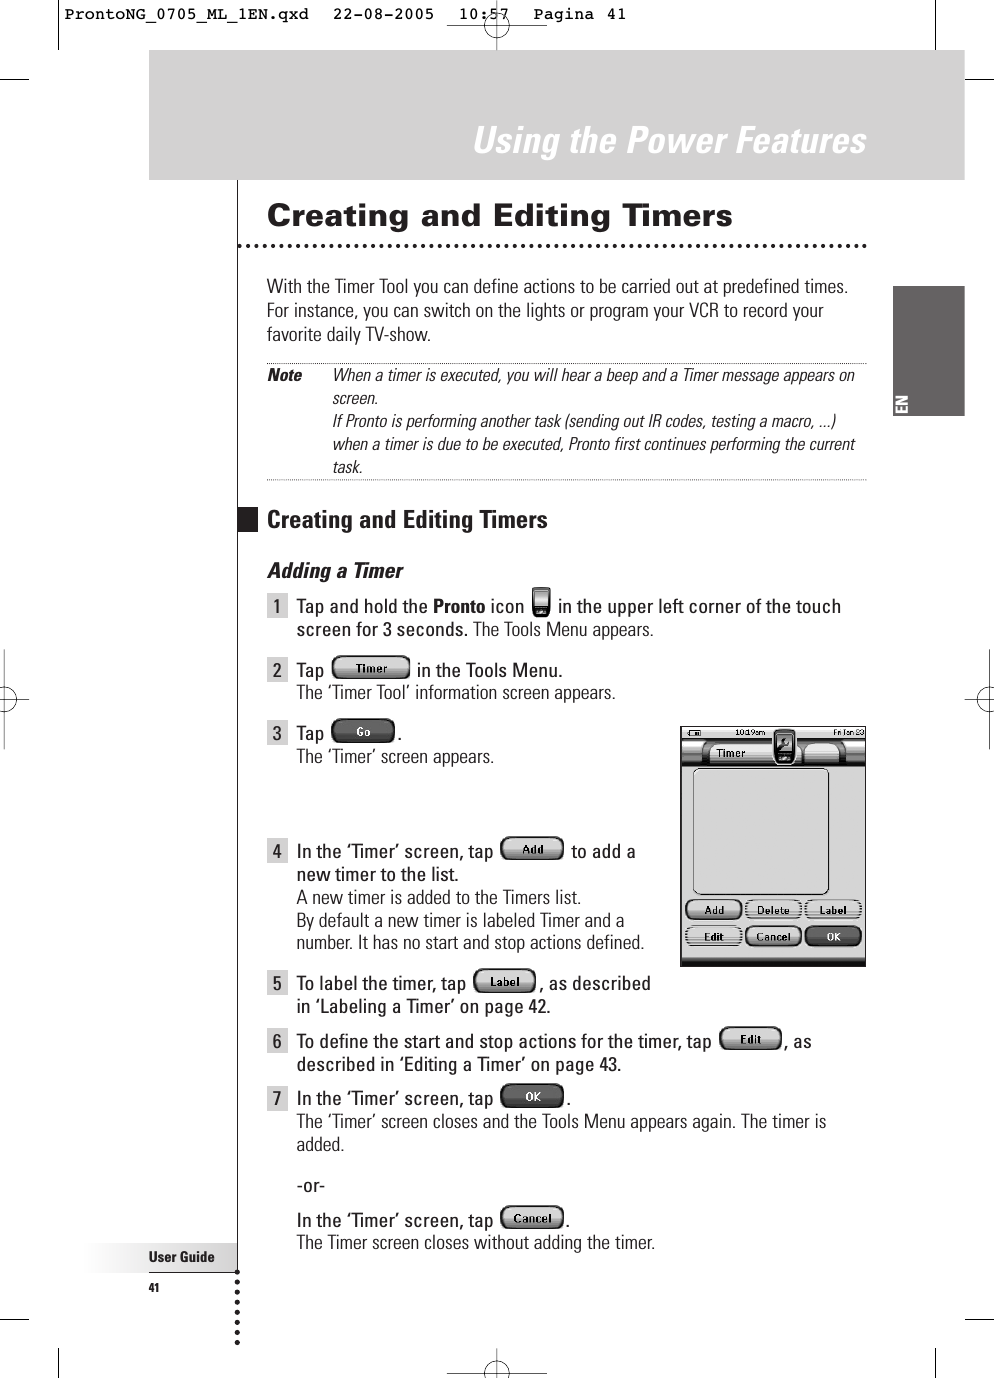 User Guide41ENCreating and Editing TimersWith the Timer Tool you can define actions to be carried out at predefined times.For instance, you can switch on the lights or program your VCR to record yourfavorite daily TV-show.Note When a timer is executed, you will hear a beep and a Timer message appears onscreen.If Pronto is performing another task (sending out IR codes, testing a macro, ...)when a timer is due to be executed, Pronto first continues performing the currenttask.Creating and Editing TimersAdding a Timer1Tap and hold the Pronto icon  in the upper left corner of the touchscreen for 3 seconds. The Tools Menu appears.2Tap  in the Tools Menu.The ‘Timer Tool’ information screen appears.3Tap .The ‘Timer’ screen appears.4In the ‘Timer’ screen, tap  to add a new timer to the list.A new timer is added to the Timers list.By default a new timer is labeled Timer and a number. It has no start and stop actions defined.5To label the timer, tap  , as described in ‘Labeling a Timer’ on page 42.6To define the start and stop actions for the timer, tap  , asdescribed in ‘Editing a Timer’ on page 43.7In the ‘Timer’ screen, tap  .The ‘Timer’ screen closes and the Tools Menu appears again. The timer isadded.-or-In the ‘Timer’ screen, tap  .The Timer screen closes without adding the timer.Using the Power FeaturesProntoNG_0705_ML_1EN.qxd  22-08-2005  10:57  Pagina 41